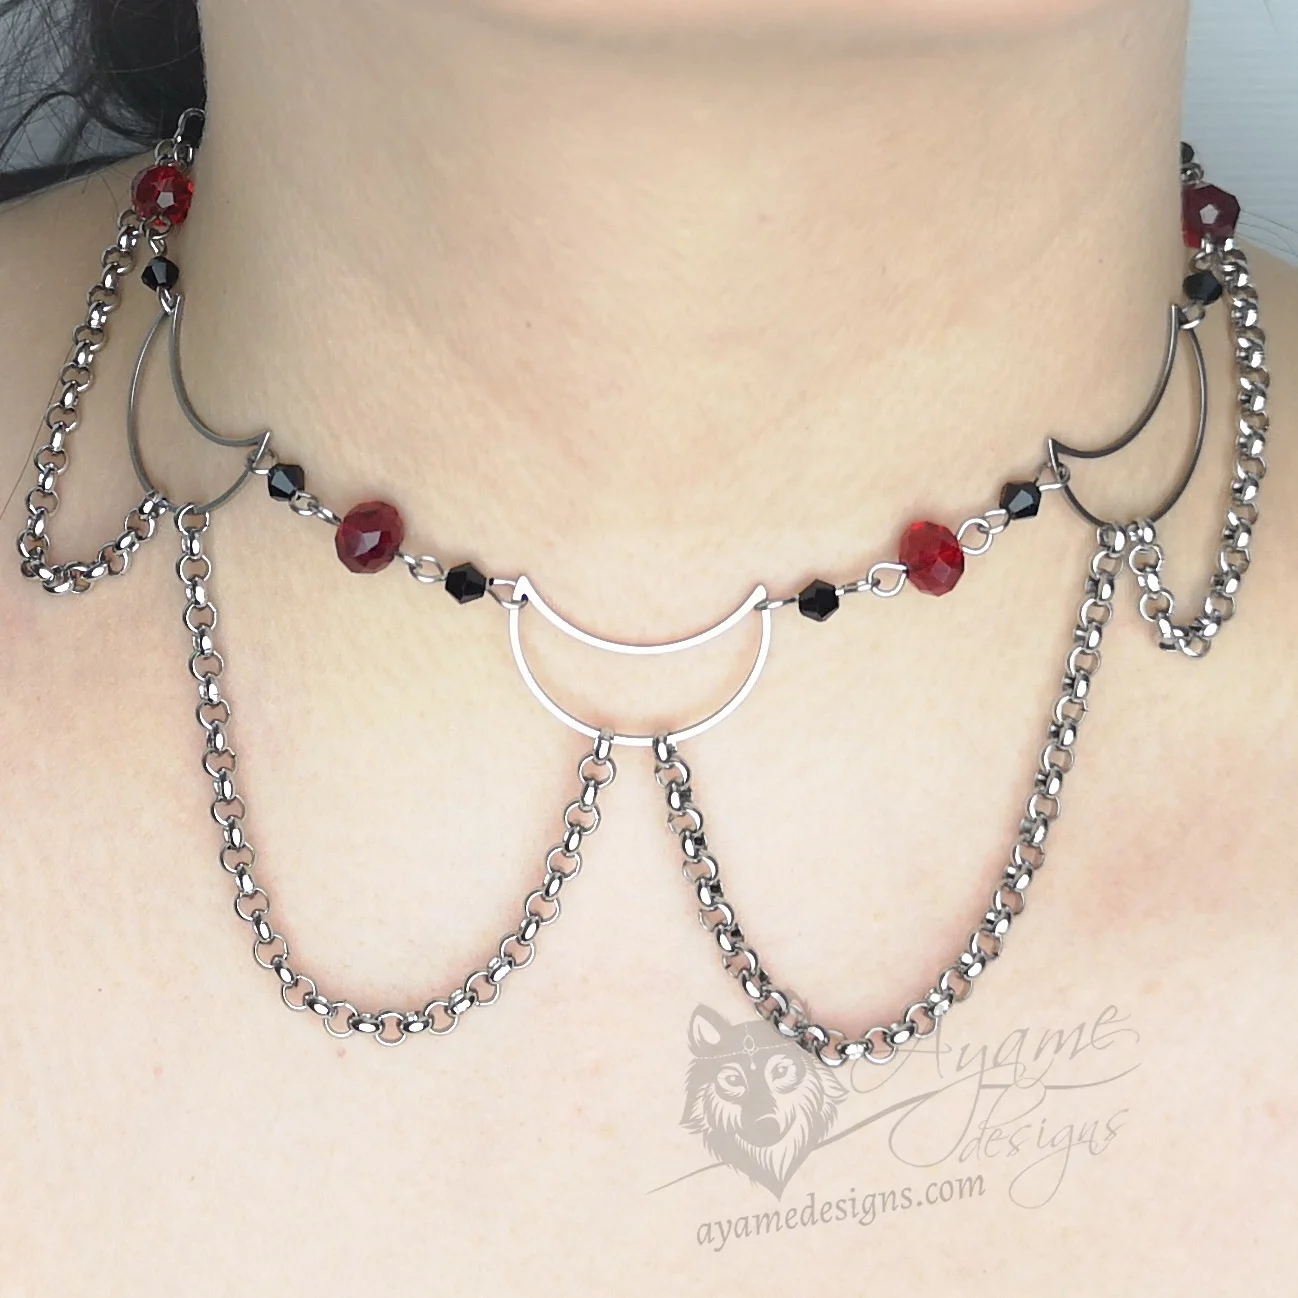 Handmade adjustable stainless steel choker necklace with stainless steel moons, black and red Austrian crystal beads, and stainless steel chain details